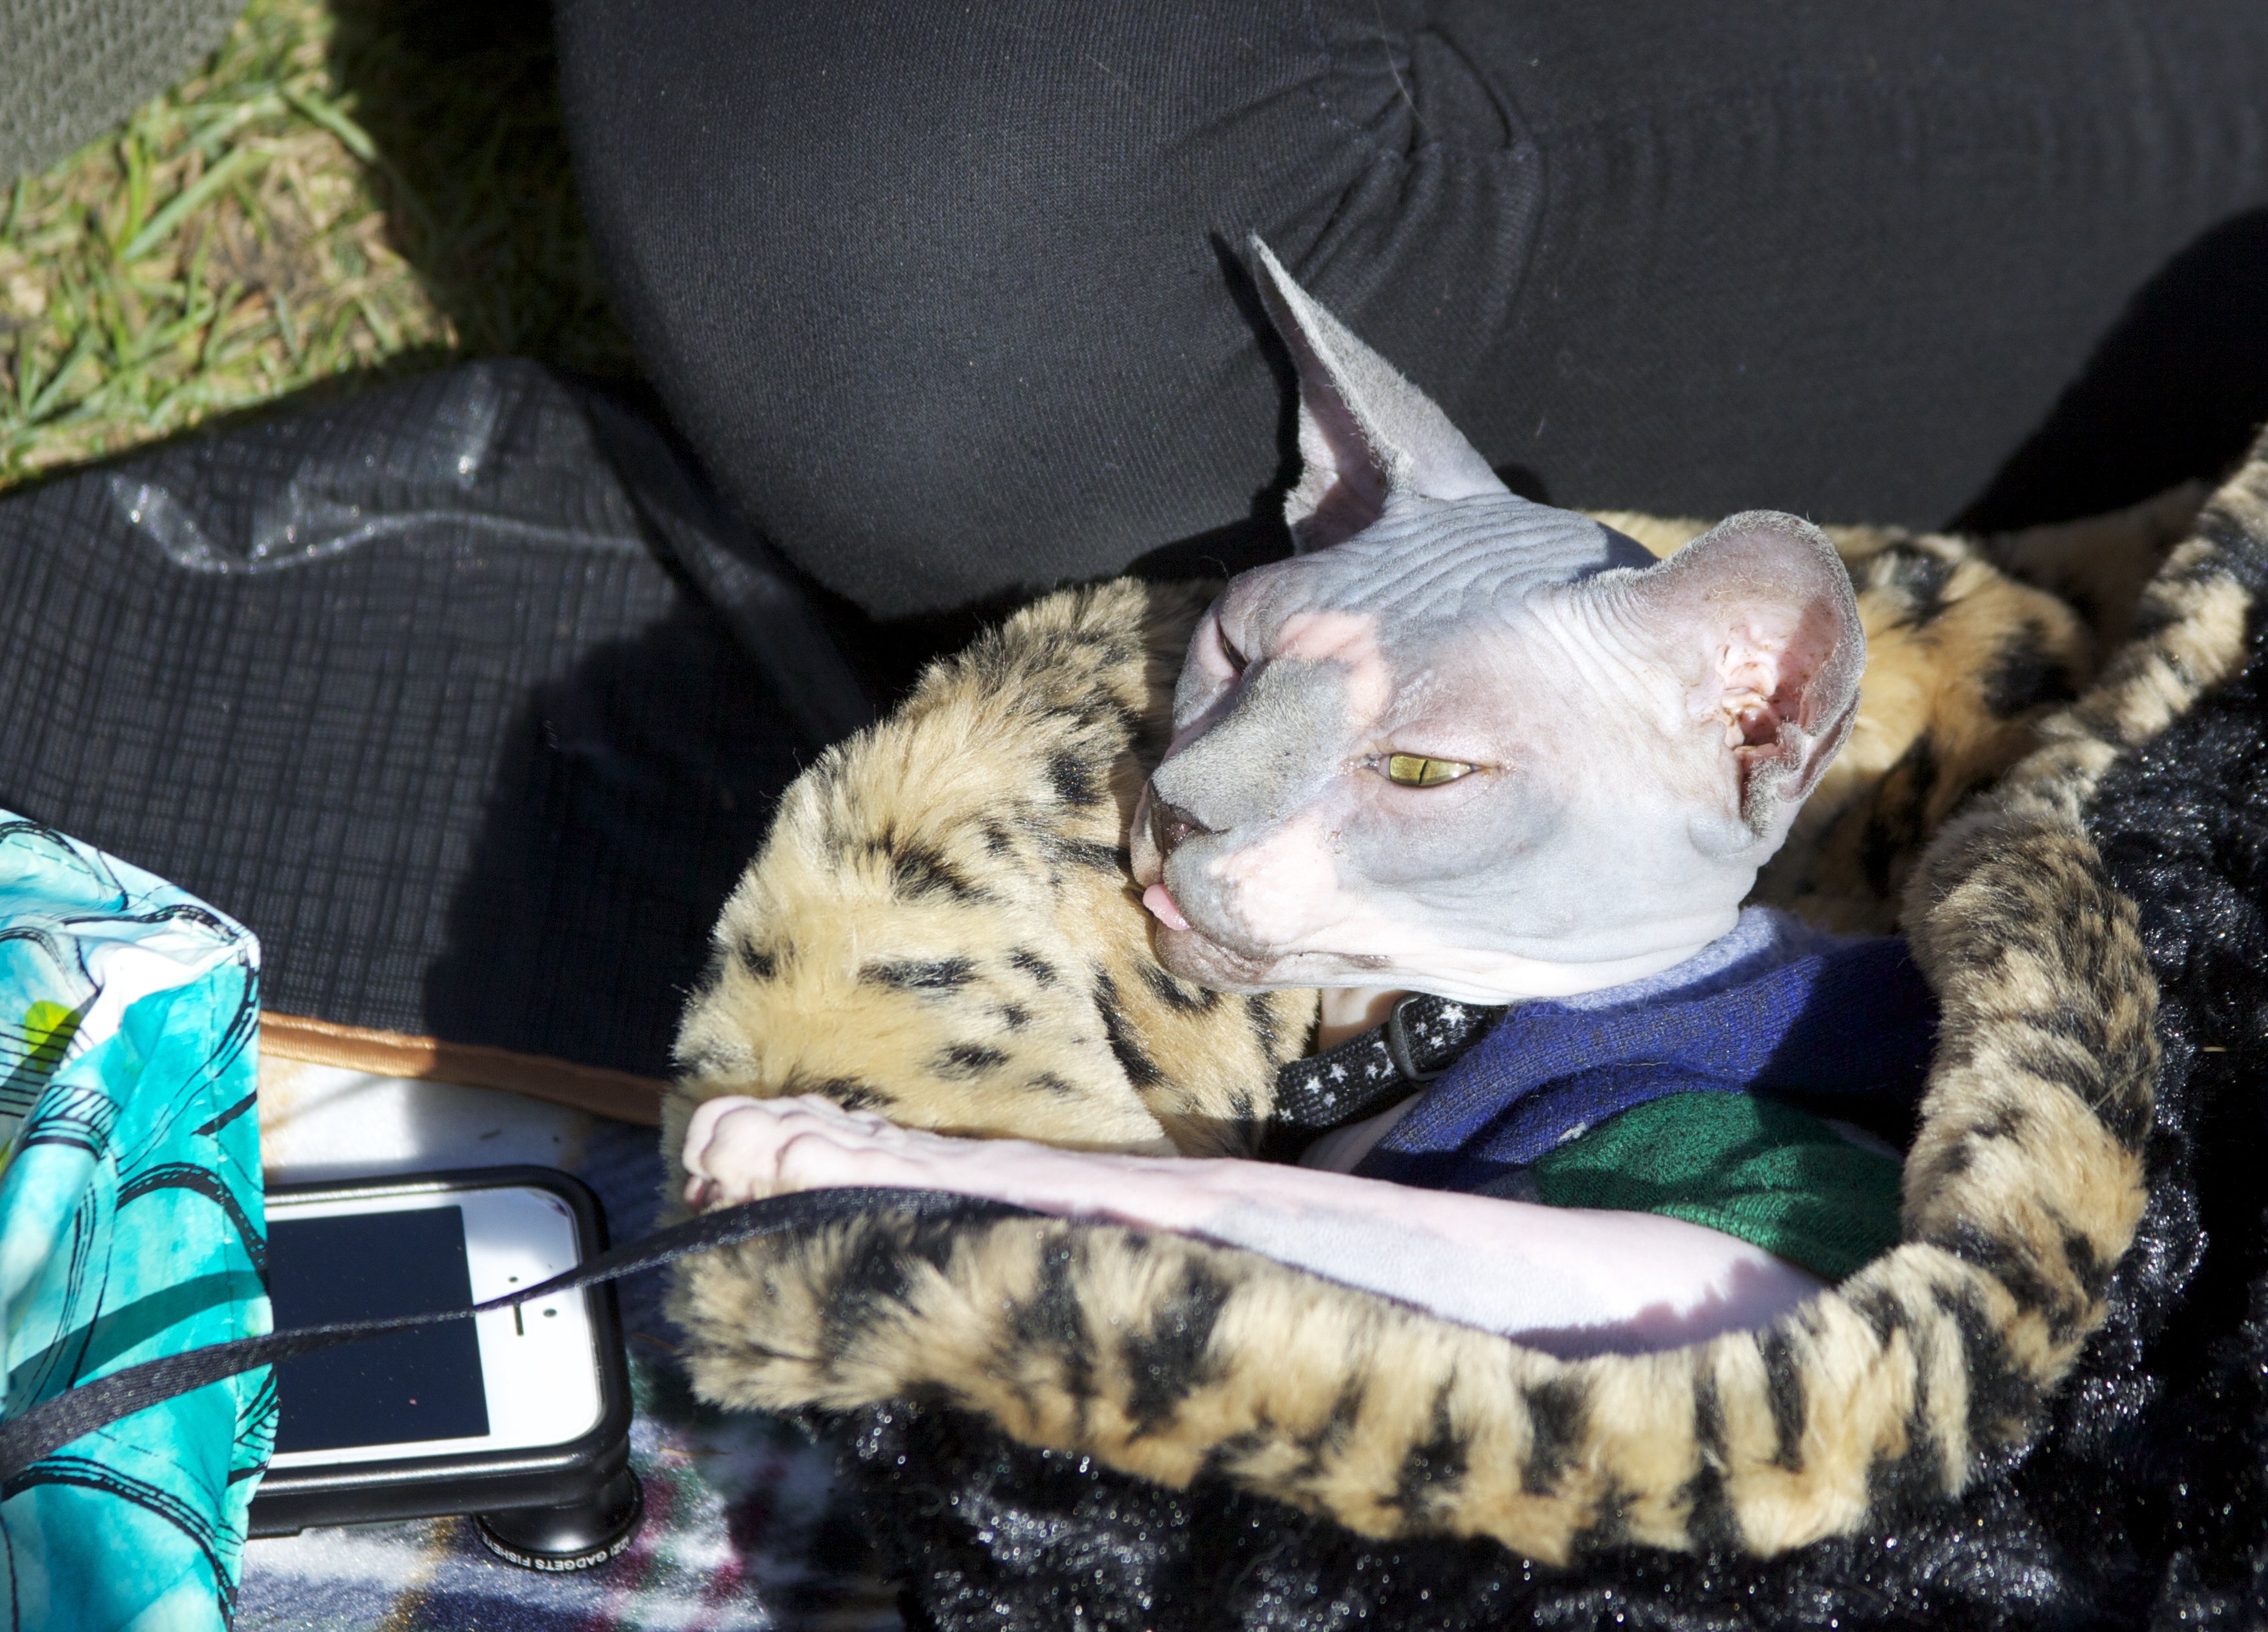 Sphinx Cat With Yellow Eyes In A Leopard Print Sleeping Bag About To Bat At An iPhone